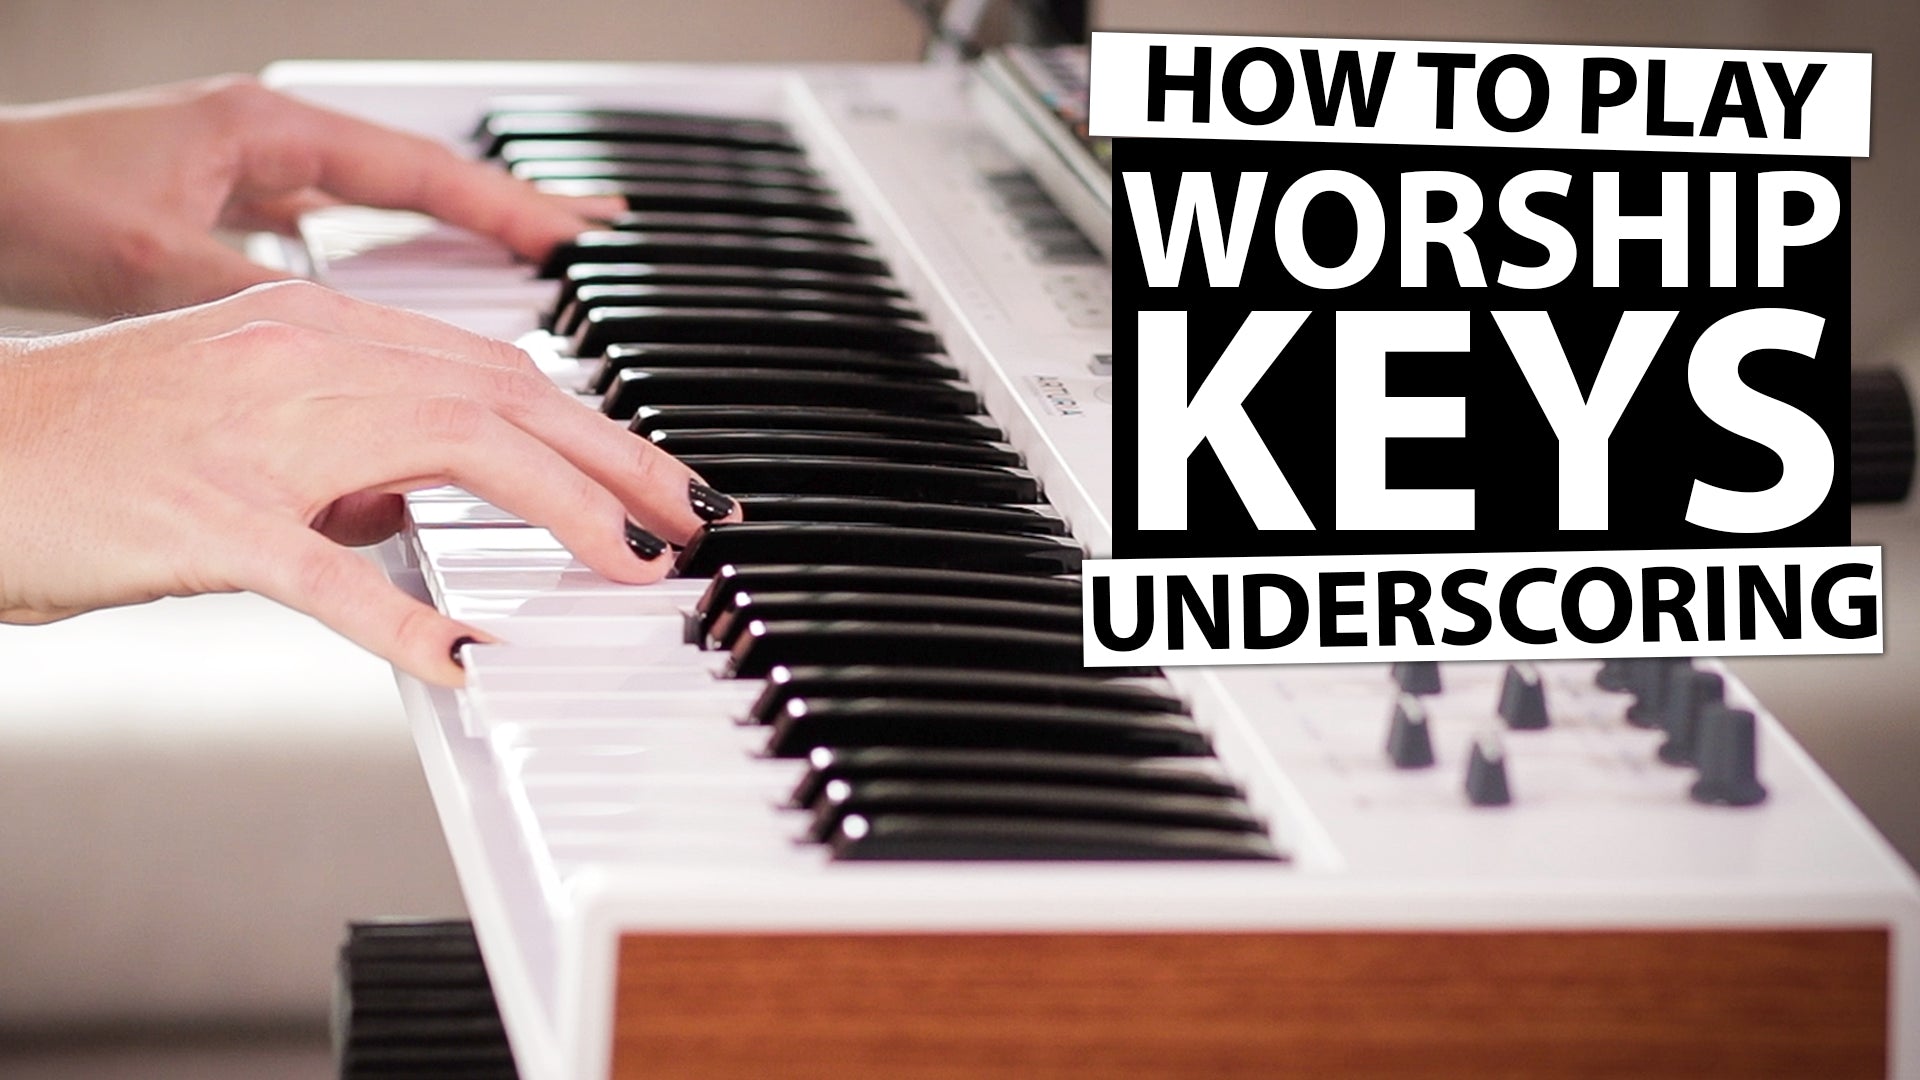 Worship Keys Tutorial: Learn How to Underscore with David and Joy